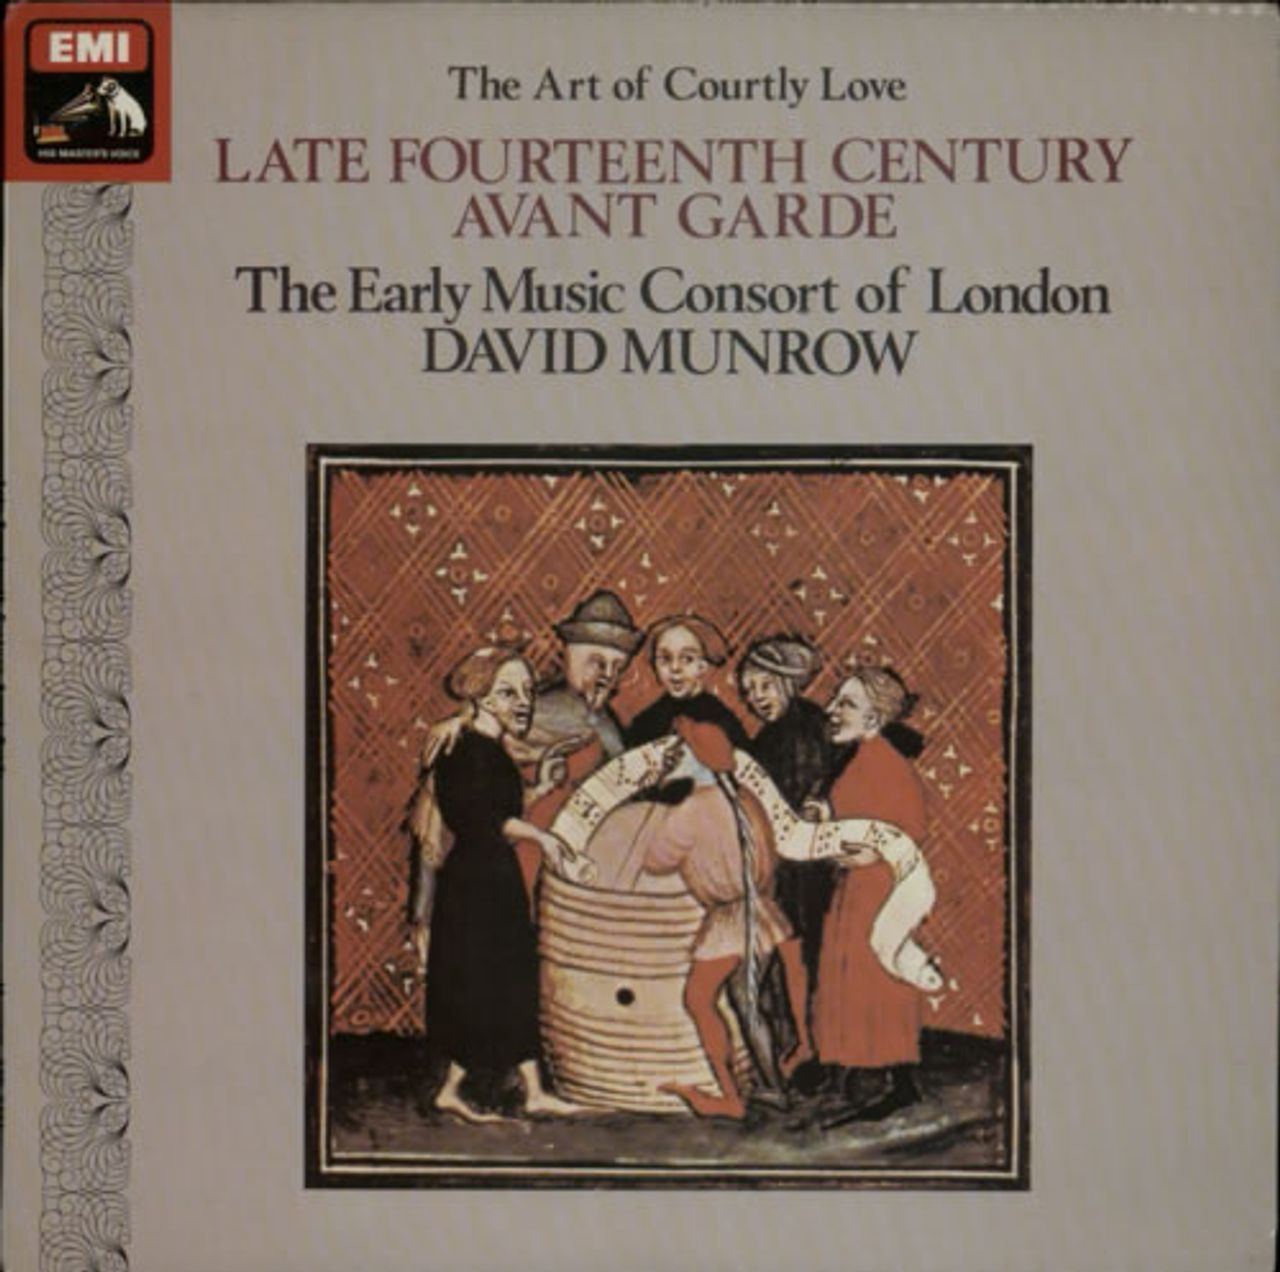 Late　Of　—　London　Early　Fourteenth　Music　Avant　Ga　The　The　Consort　Century